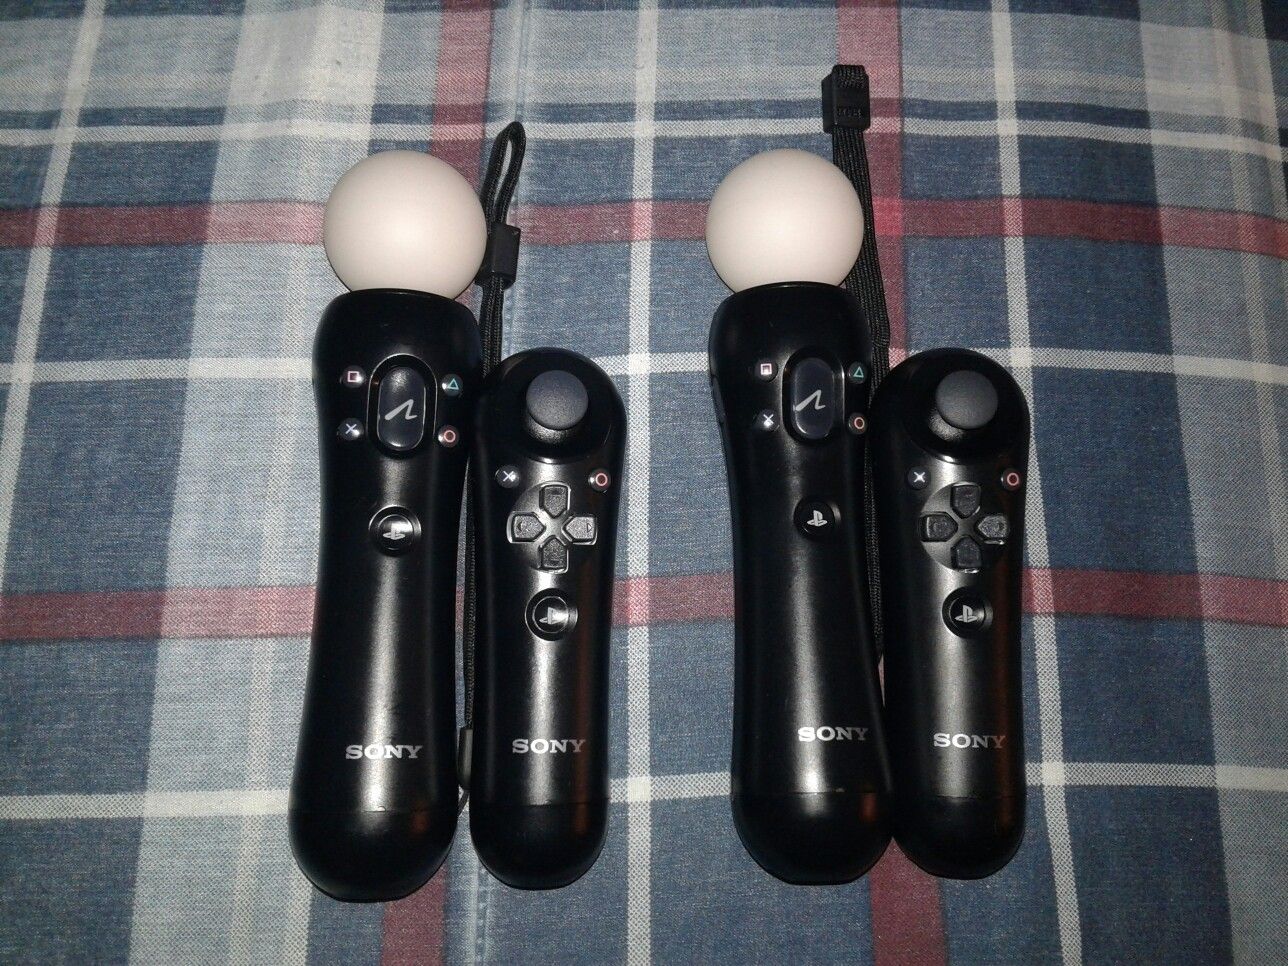 Sony PS3 Move and Navigation controllers